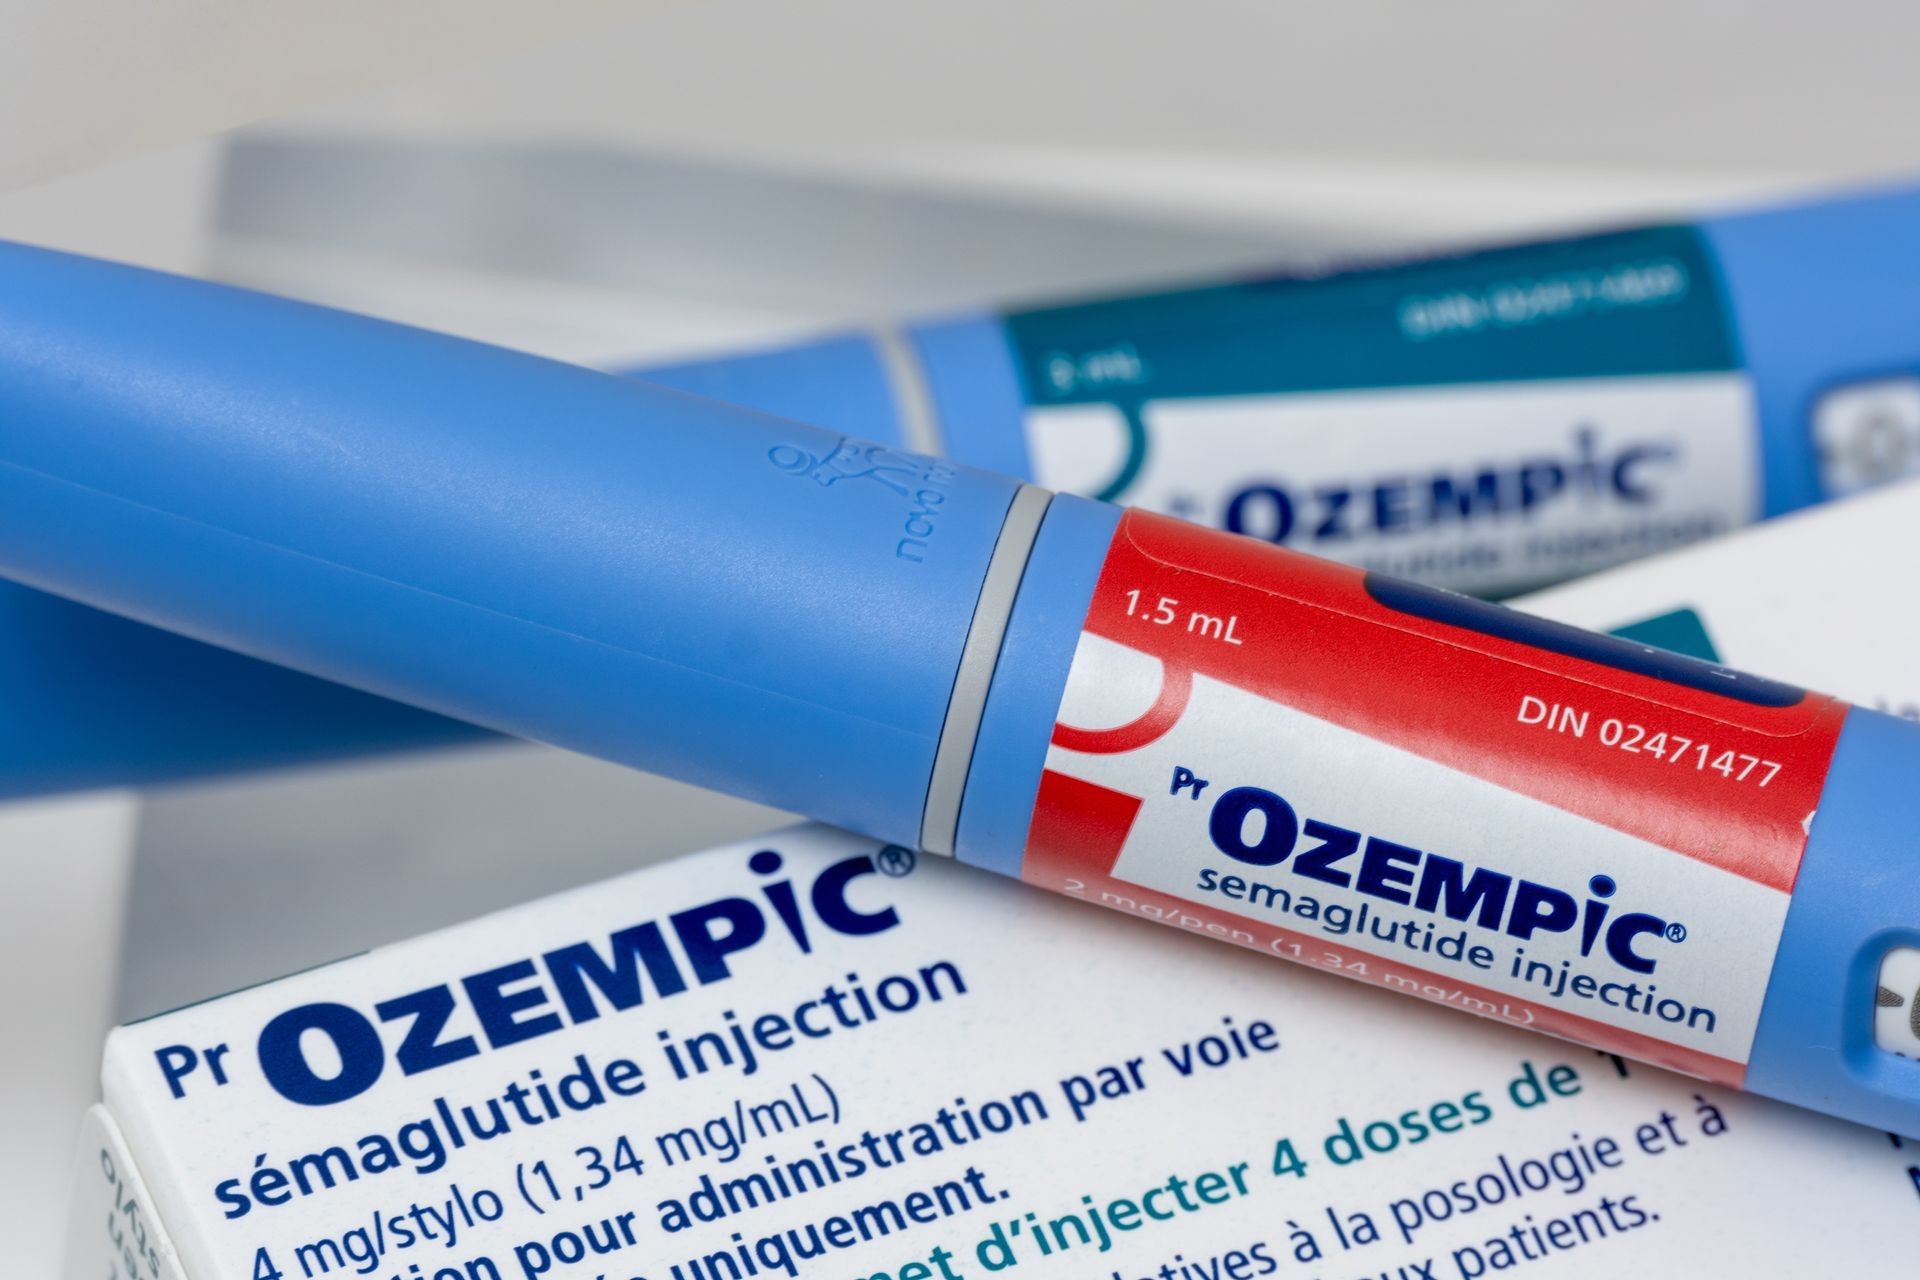 A photo of an Ozempic box by Novo Nordisk